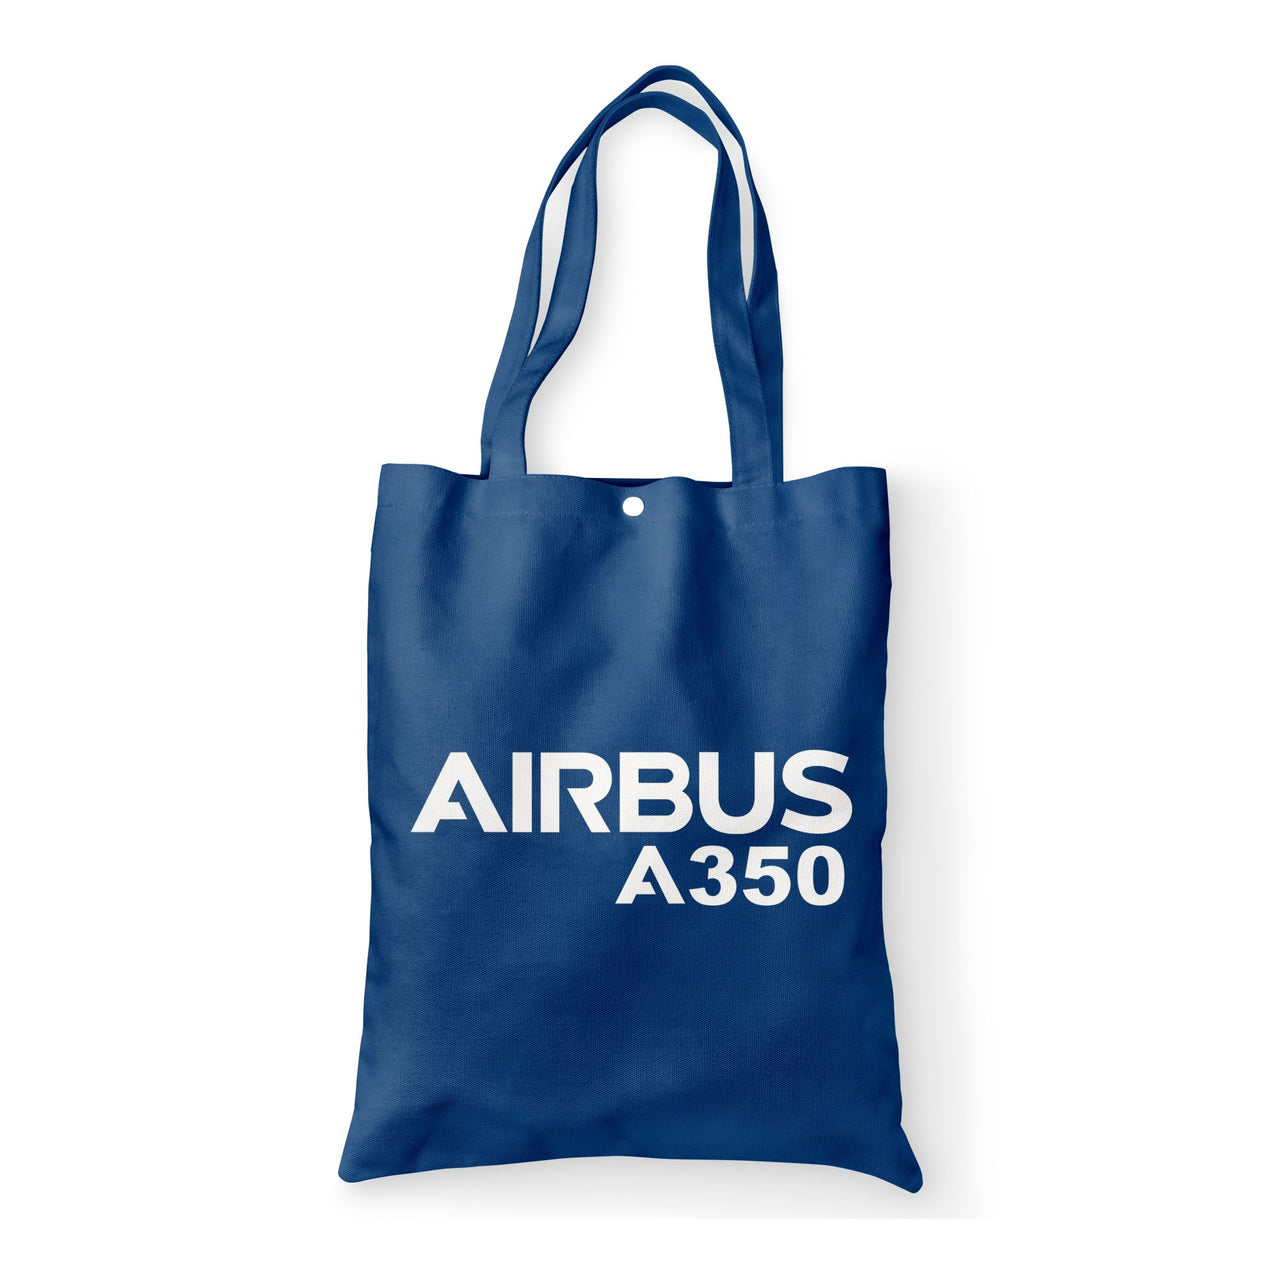 Airbus A350 & Text Designed Tote Bags